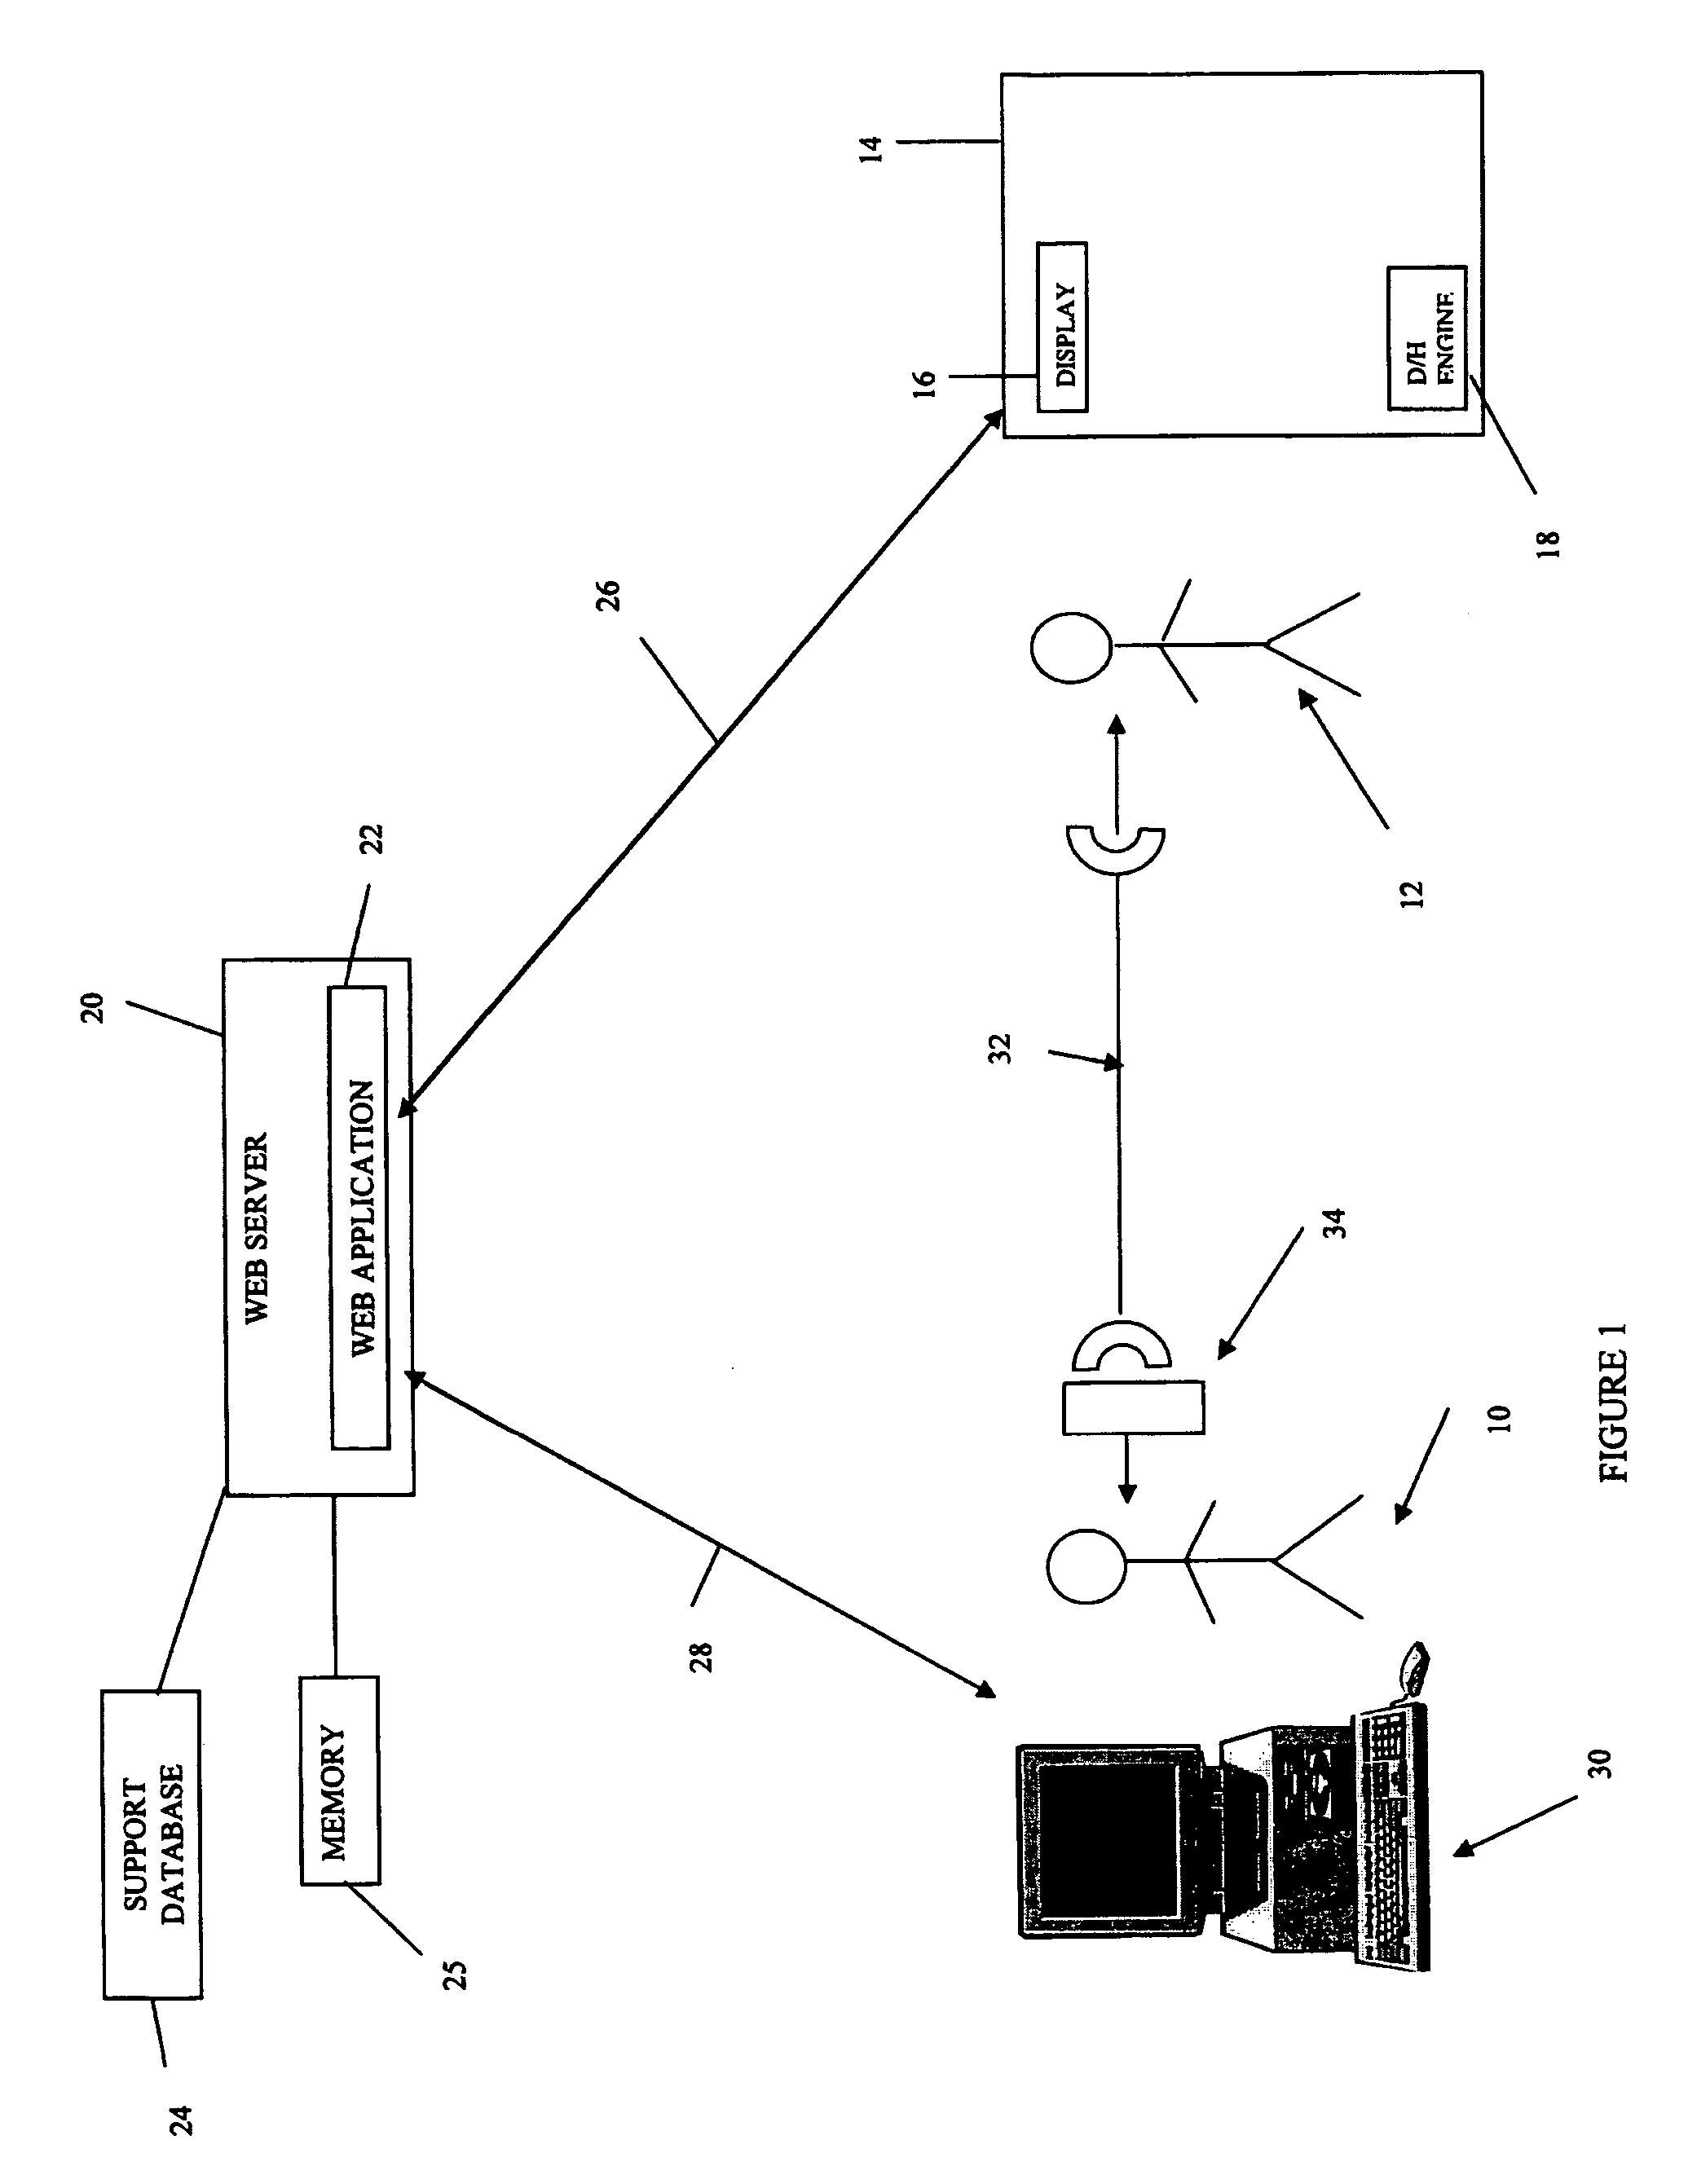 System for providing support for an electronic device